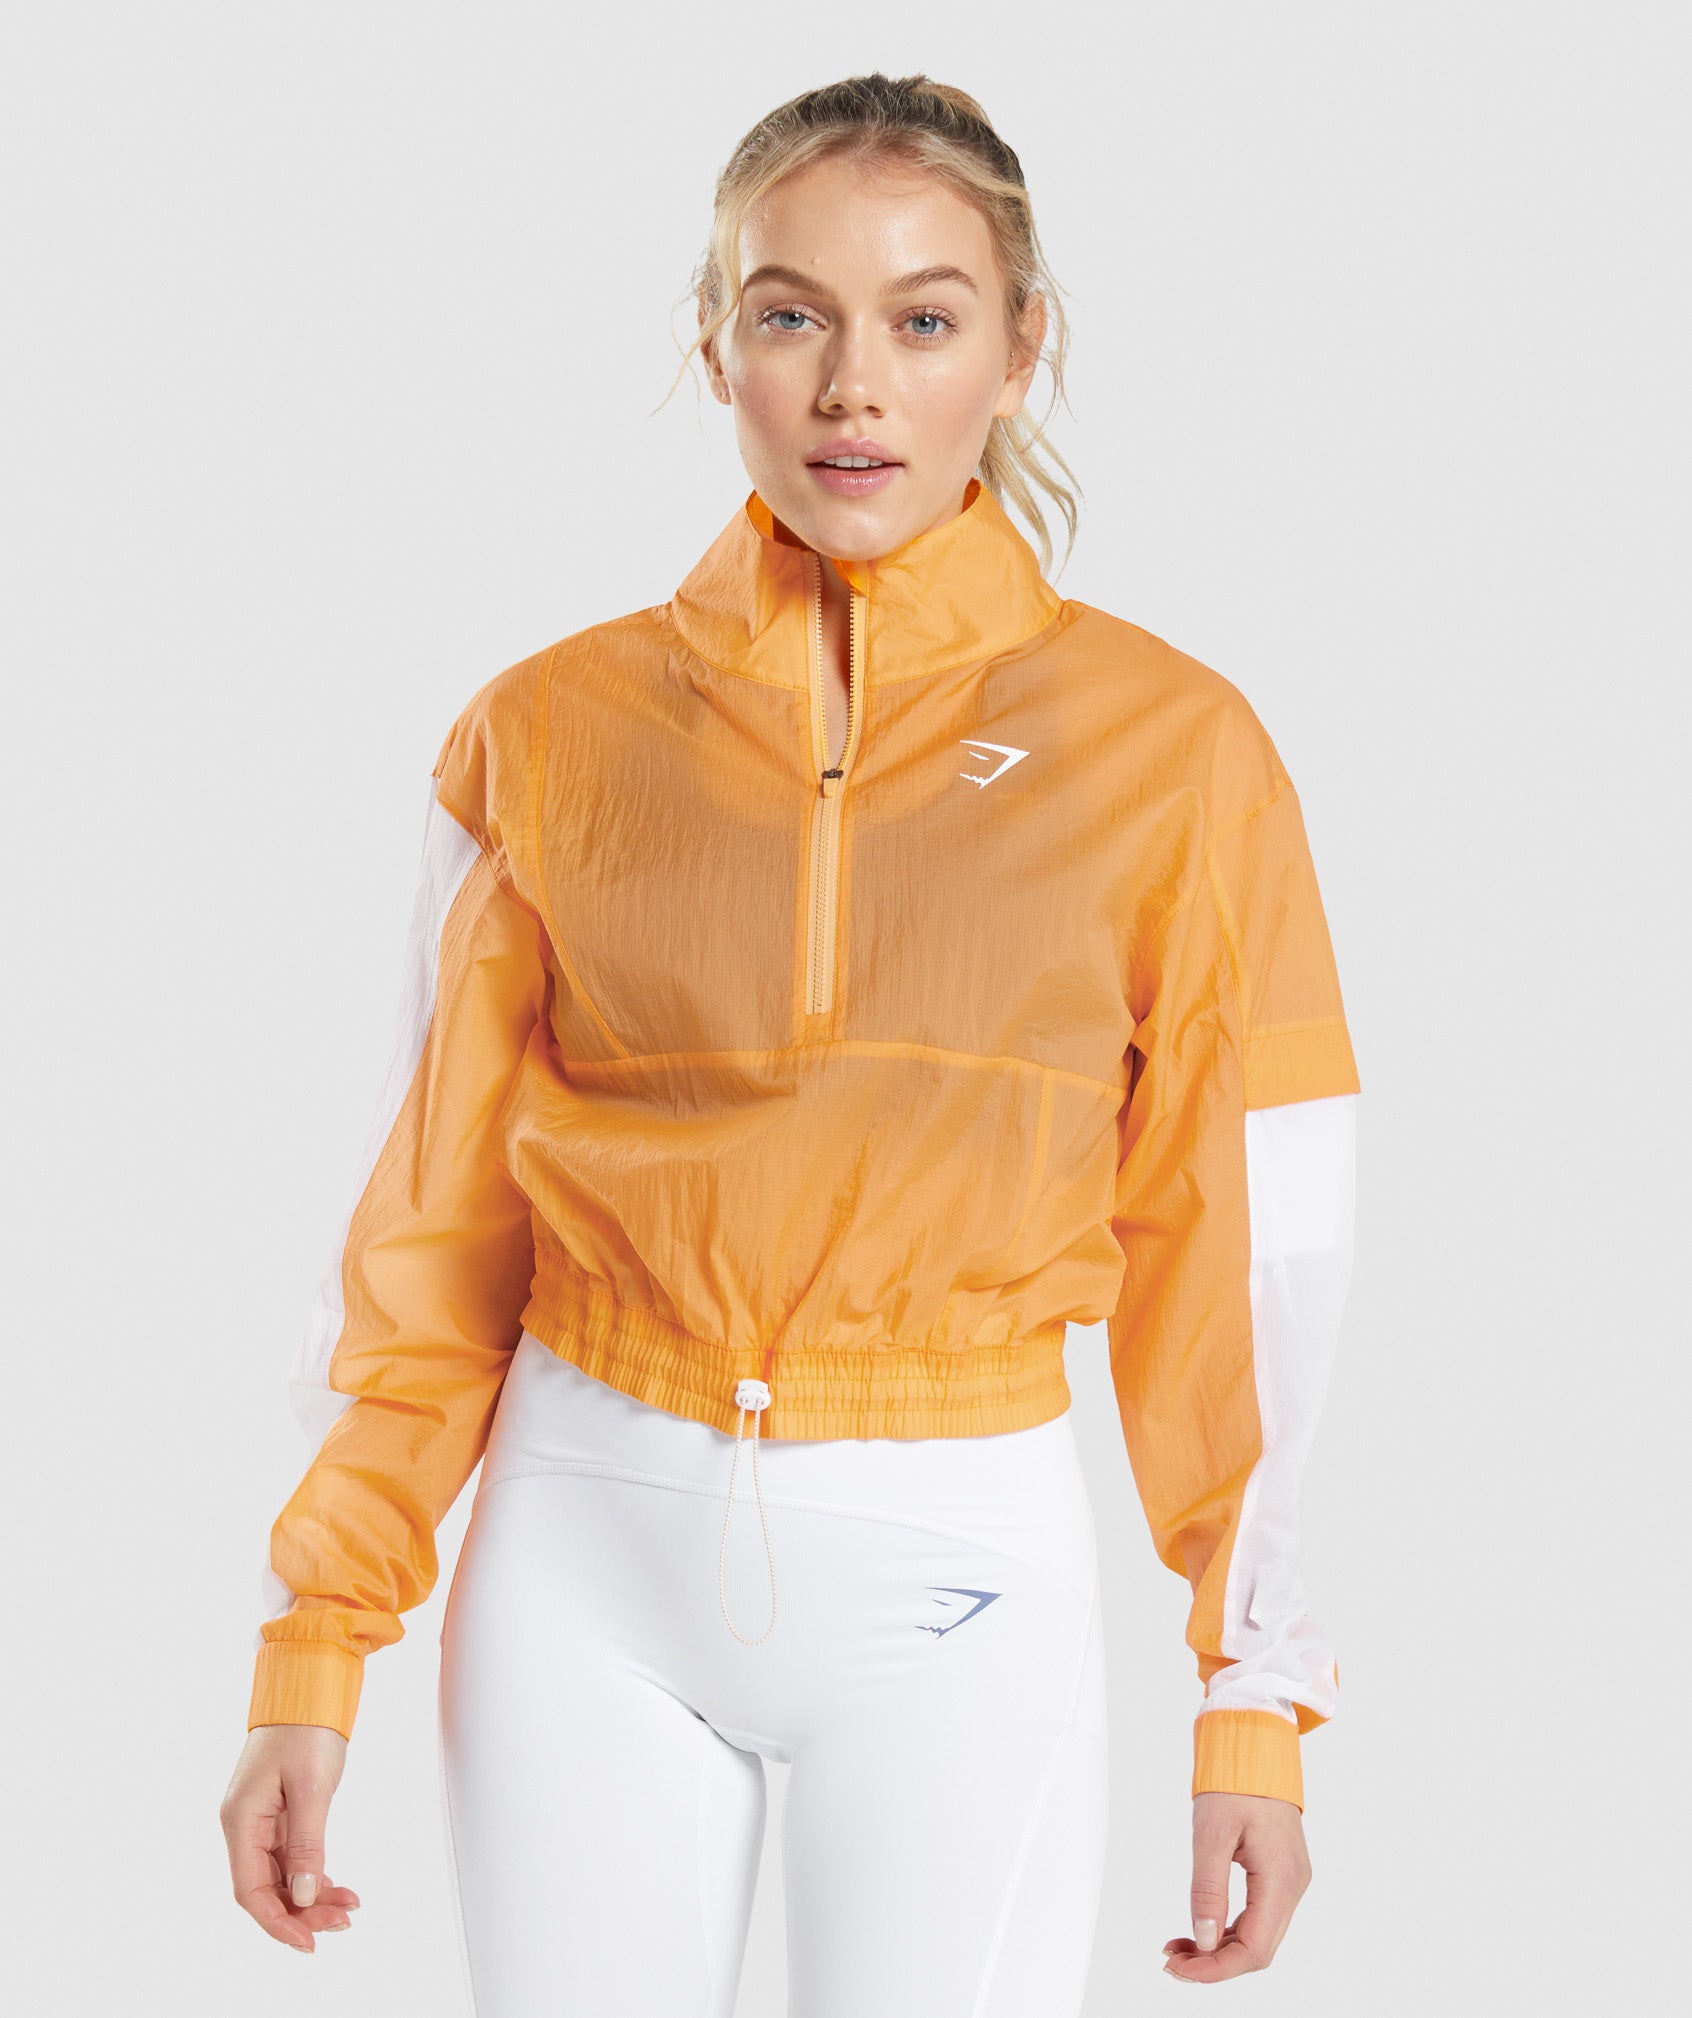 Pulse Woven Jacket in Apricot Orange/White - view 1